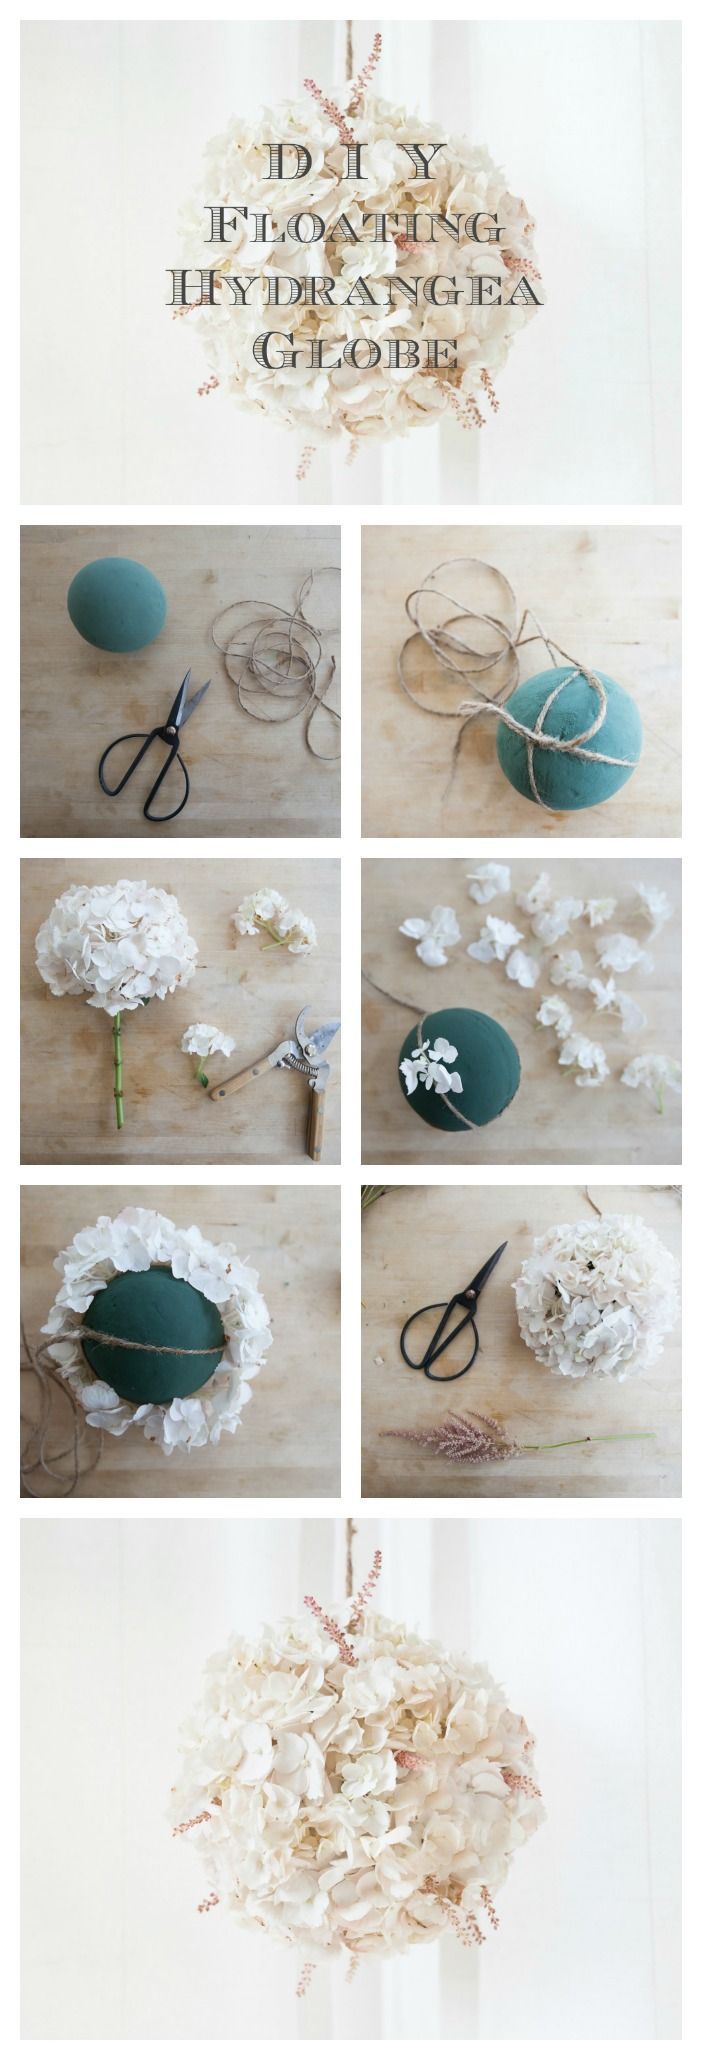 OK seriously just found the best Web site for DIY floral